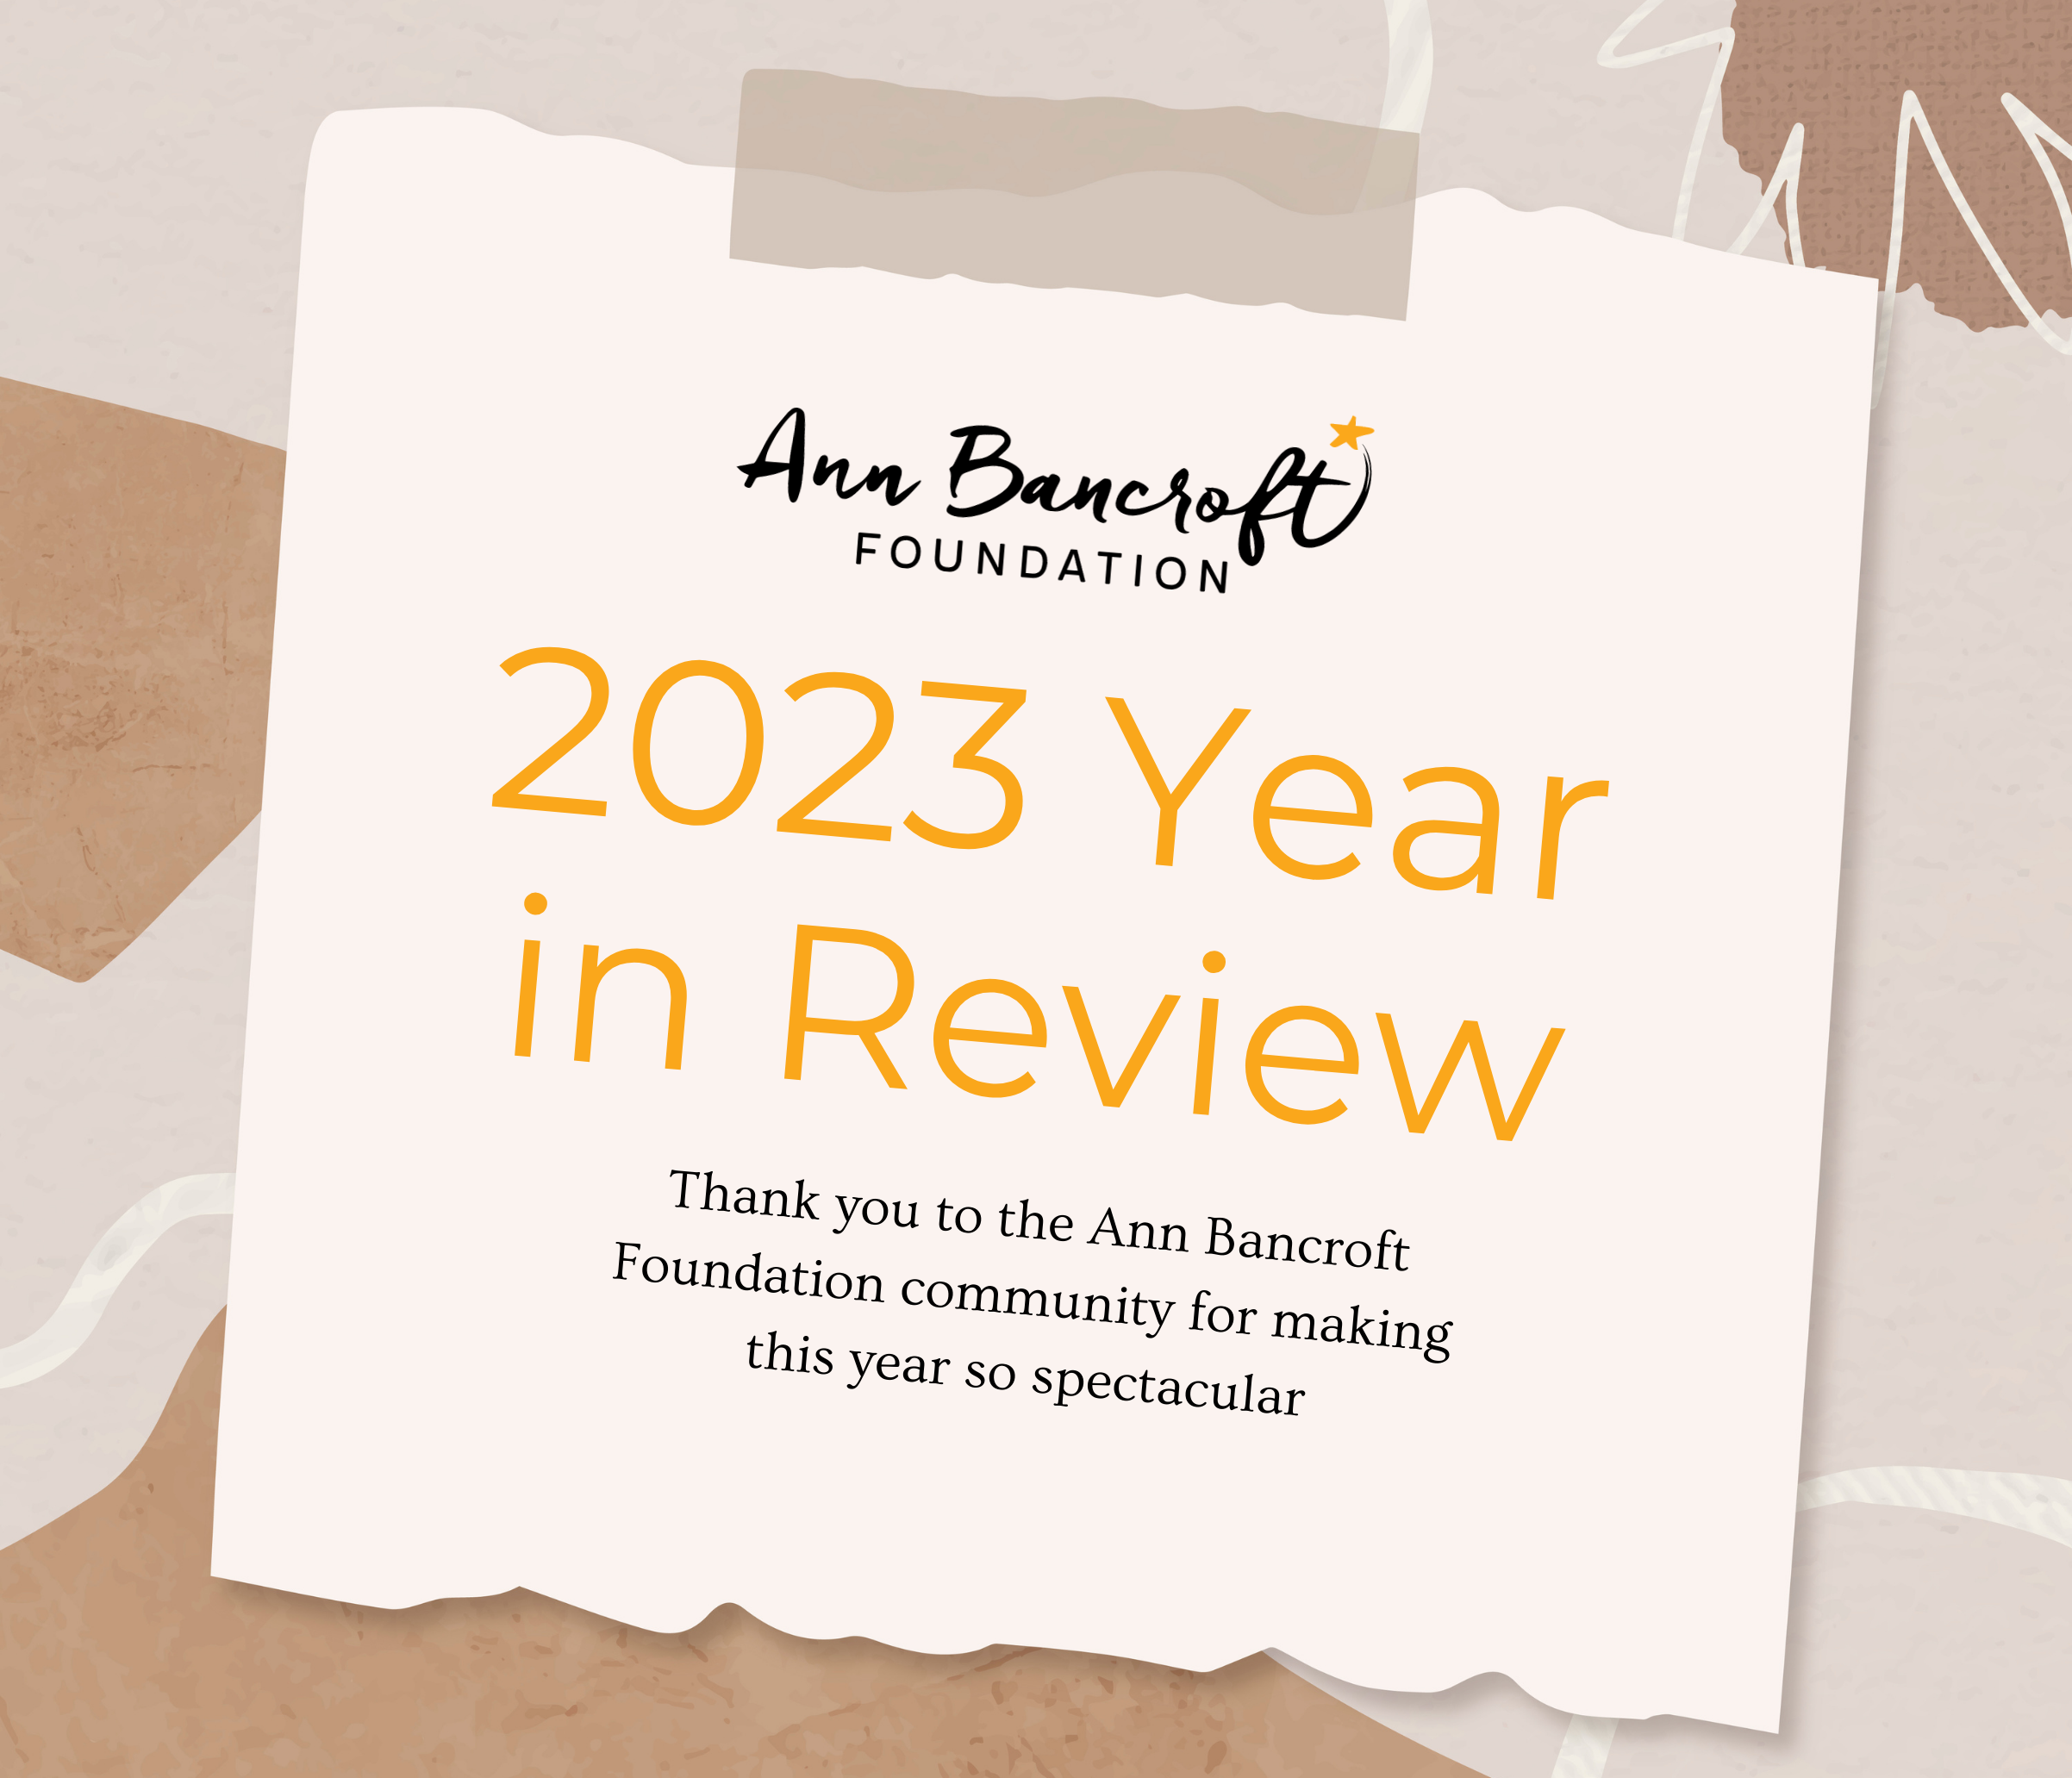 2023 Year in Review (2404 x 2063 px).png